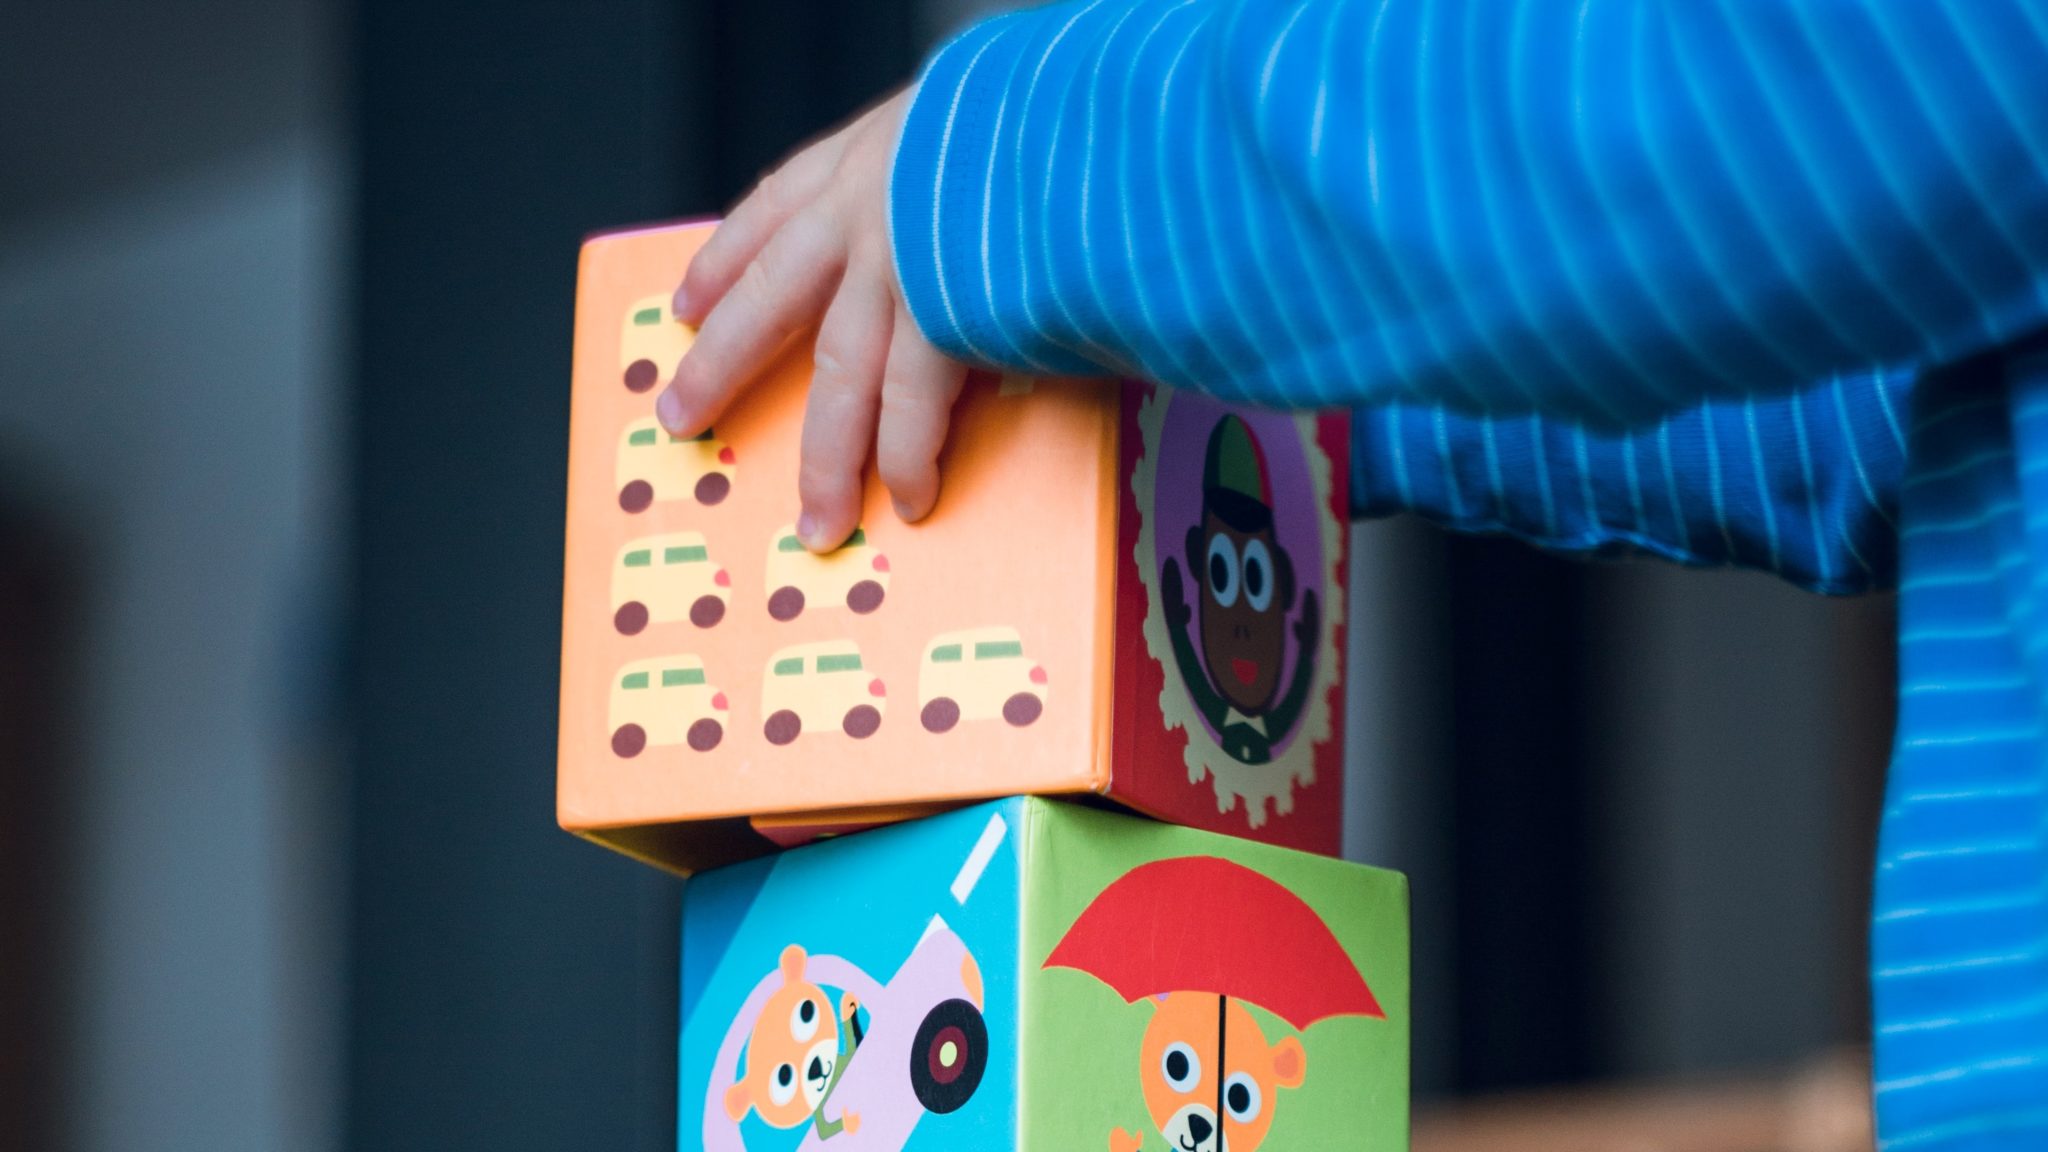 Building blocks with illustrated images on them. A child's hands are stacking them on top of each other.